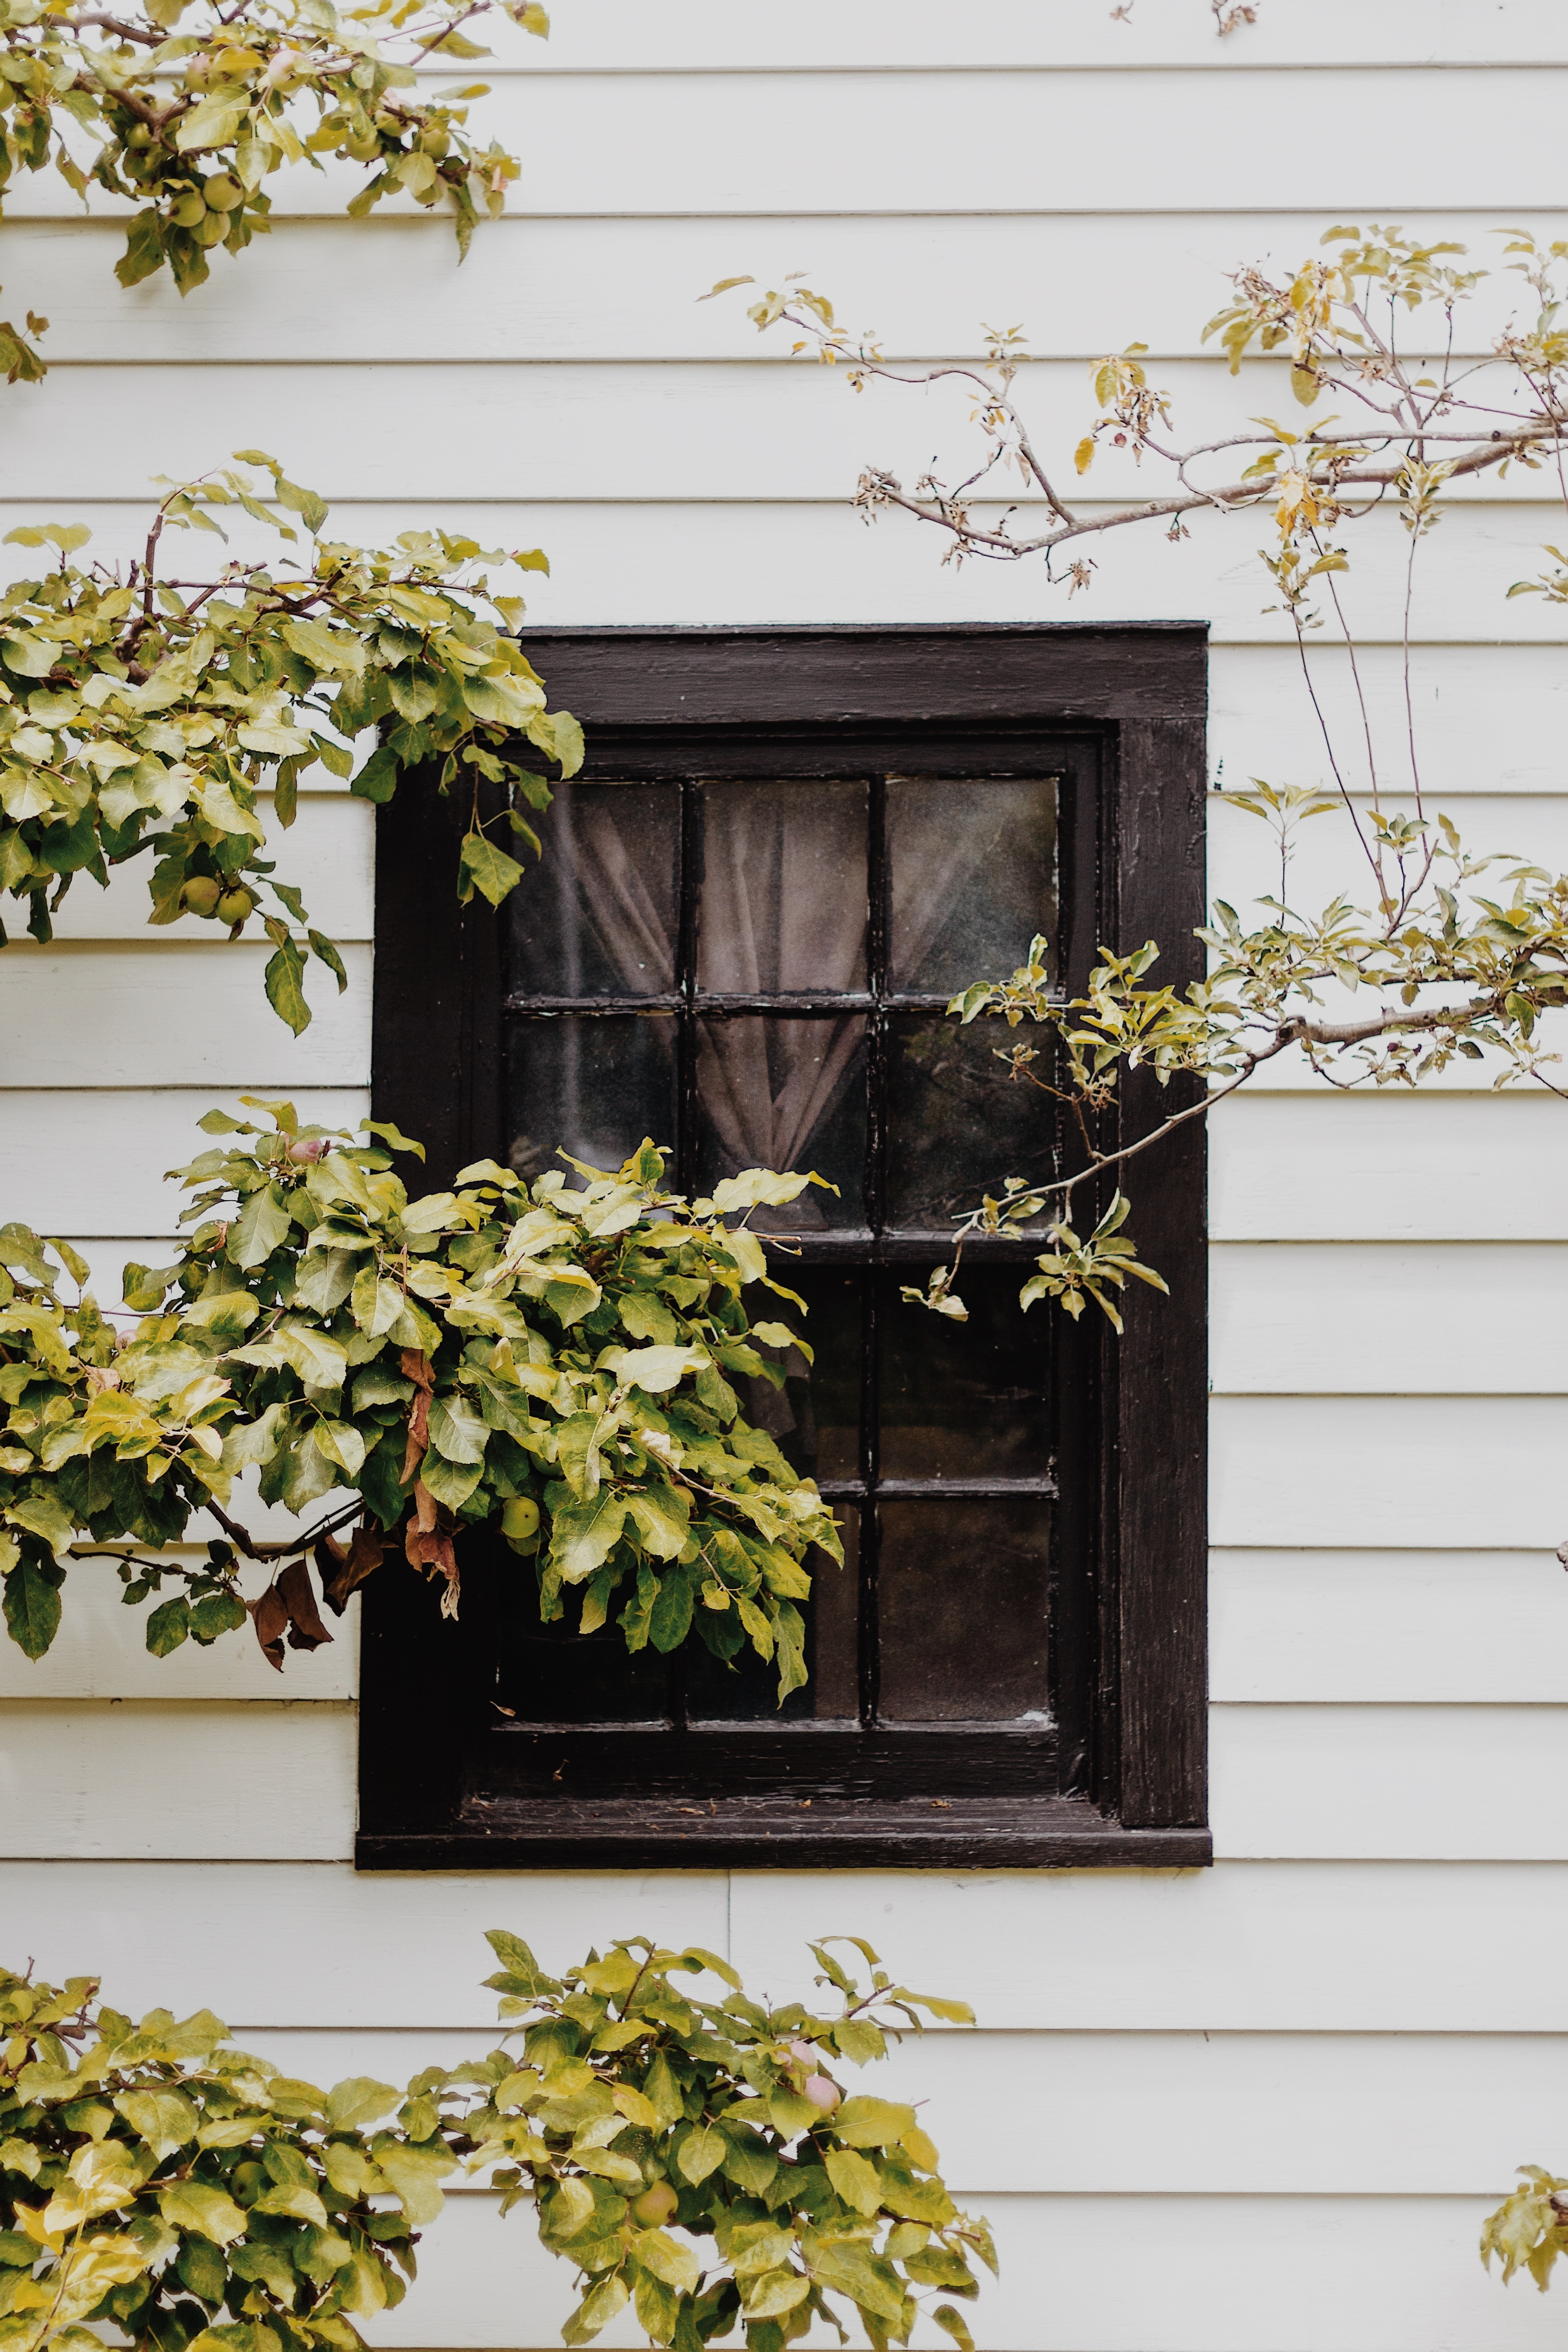 Black antique paned window on a white house behind tree branches.